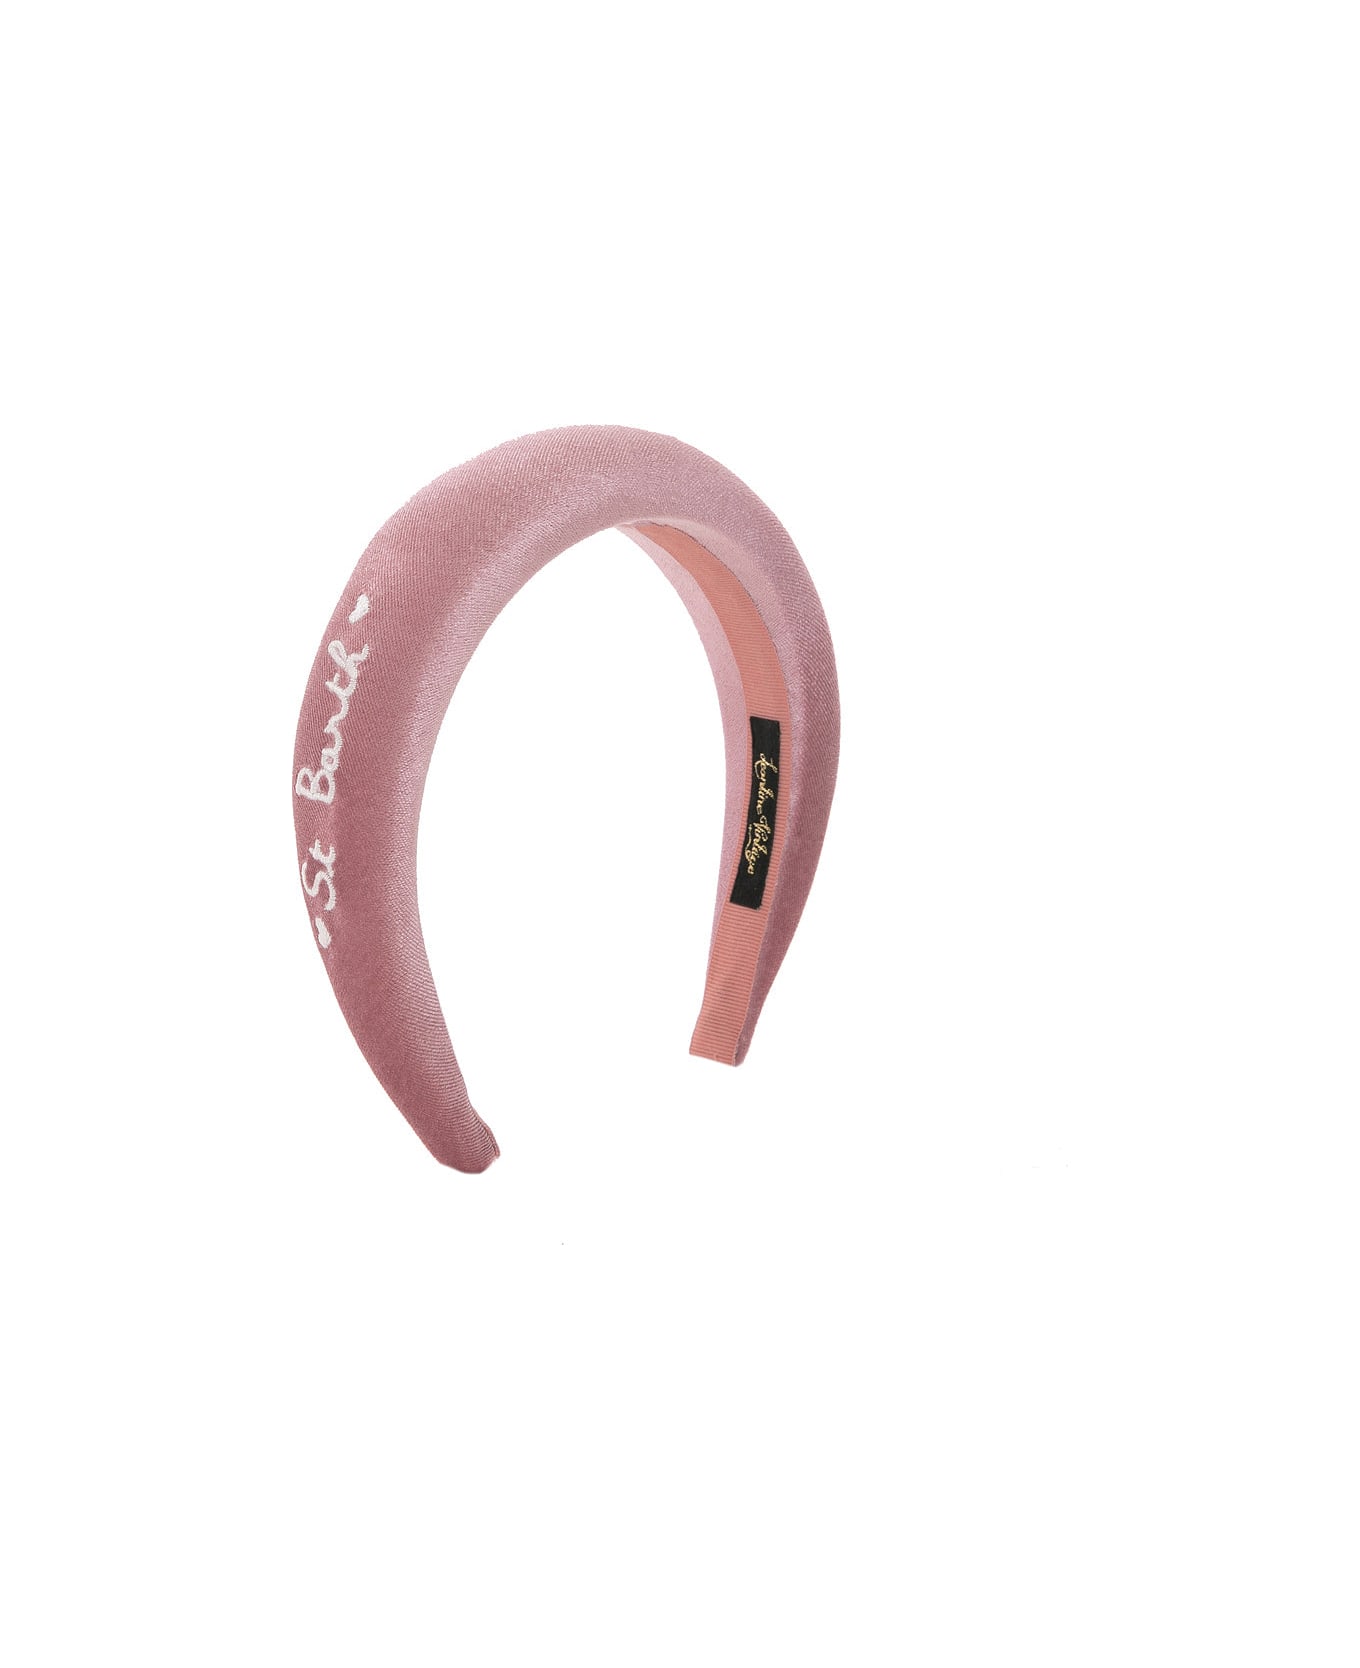 MC2 Saint Barth Woman Headband With St. Barth Embroidery | Leontine Vintage Special Edition - PINK